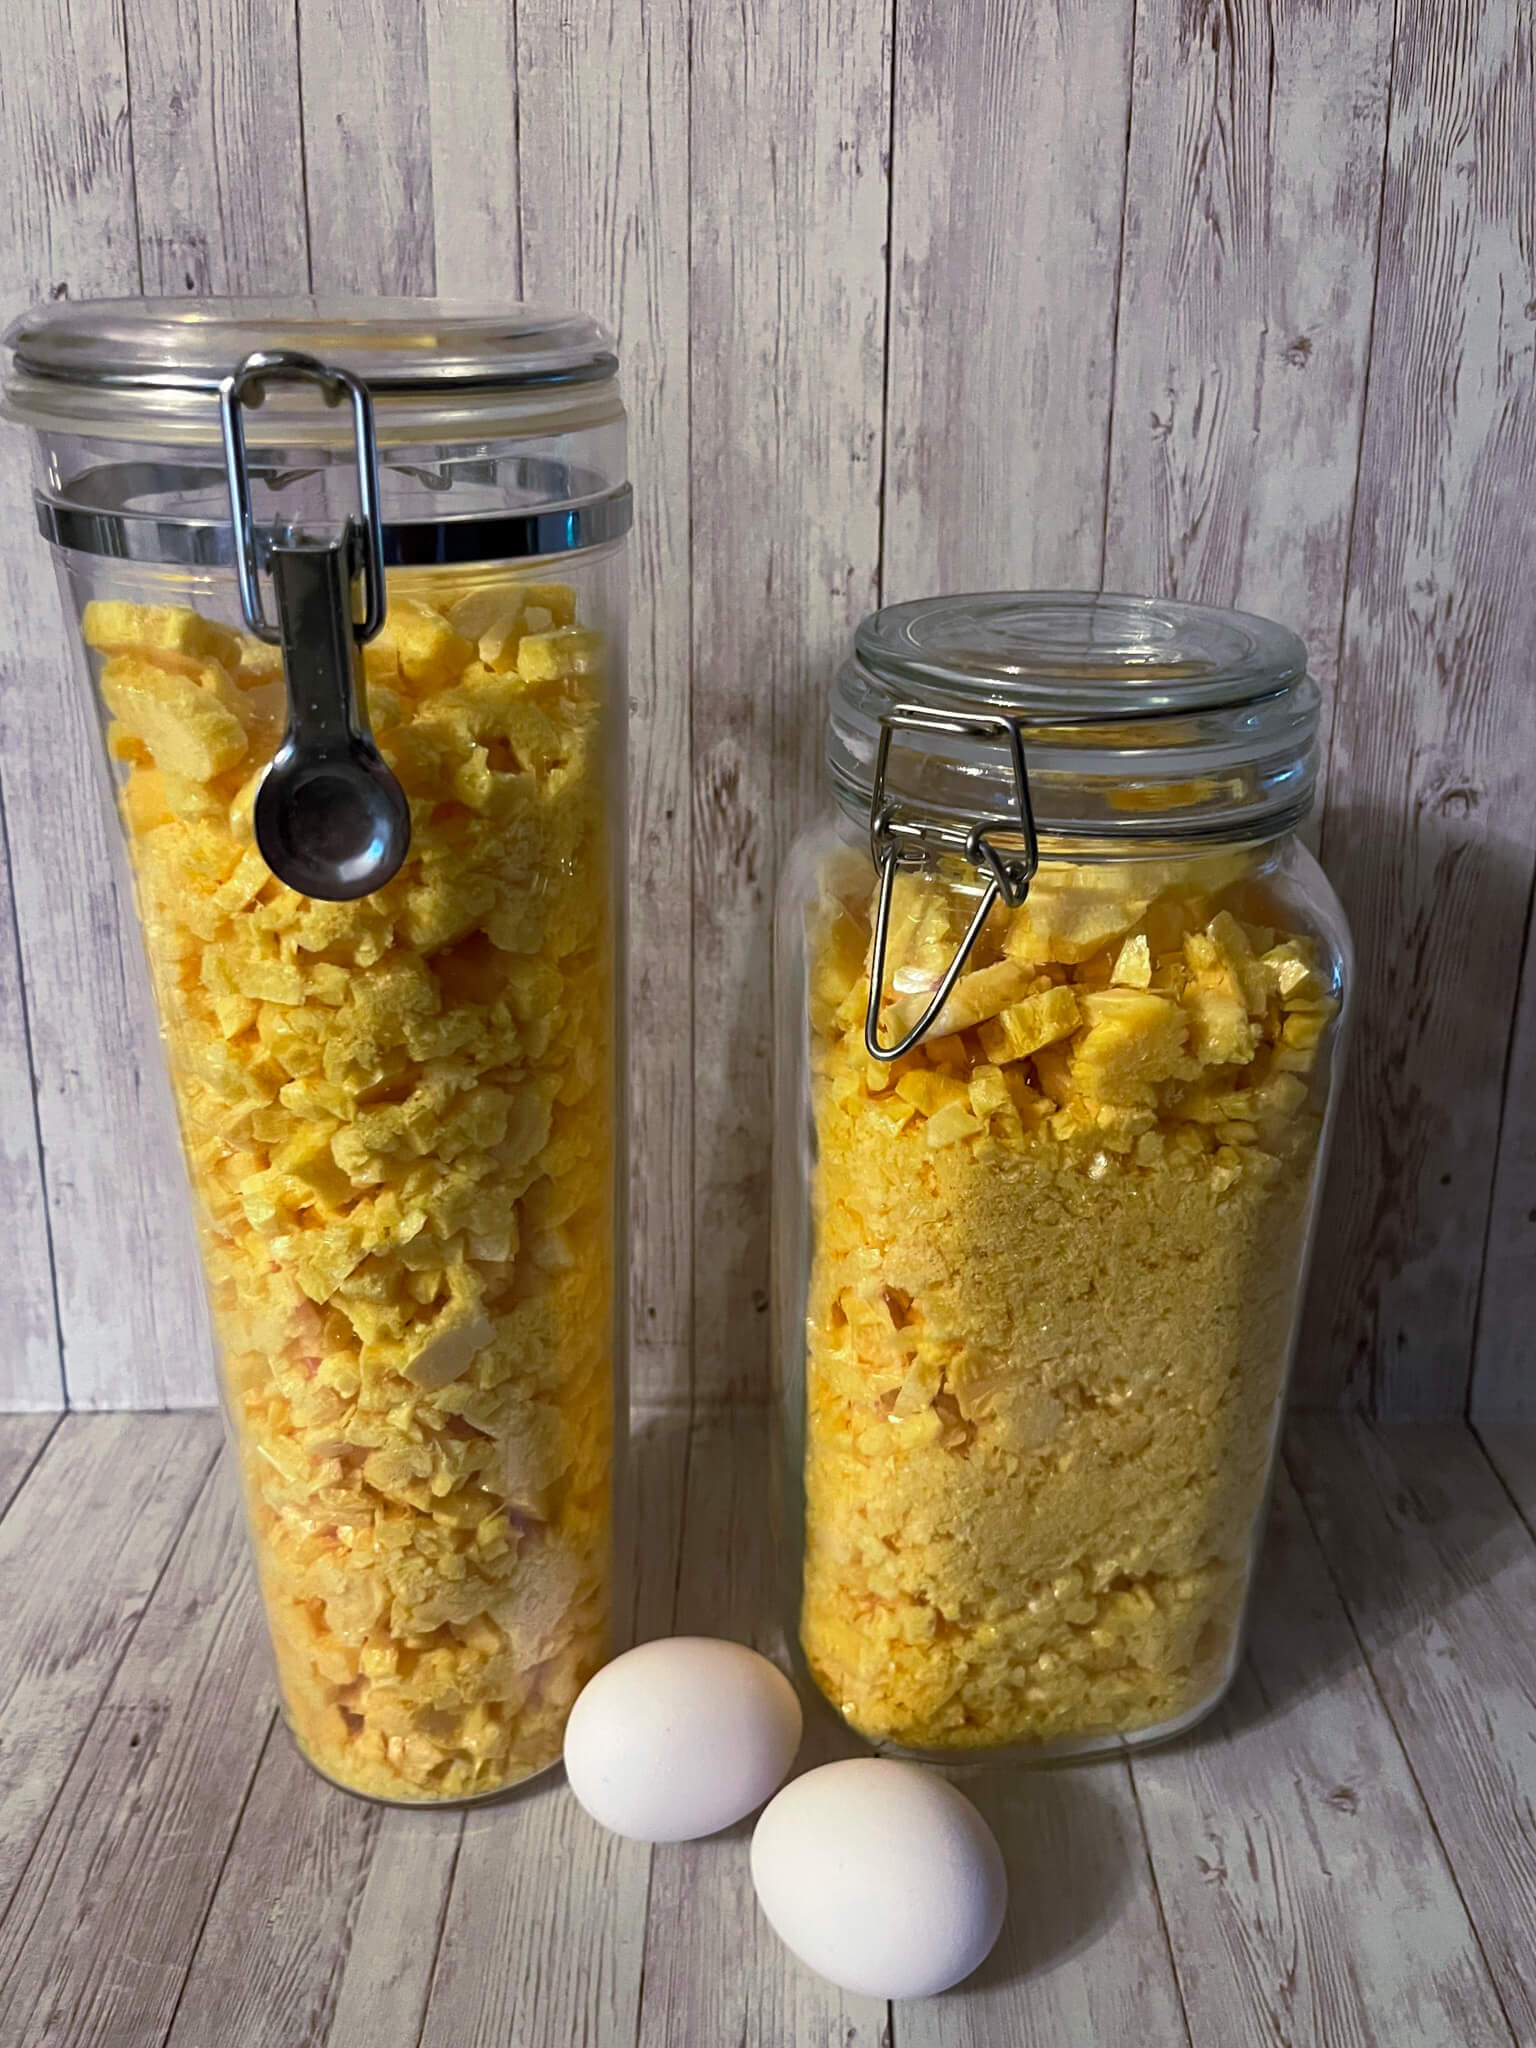 The Incredible Process of Freeze-Drying Eggs